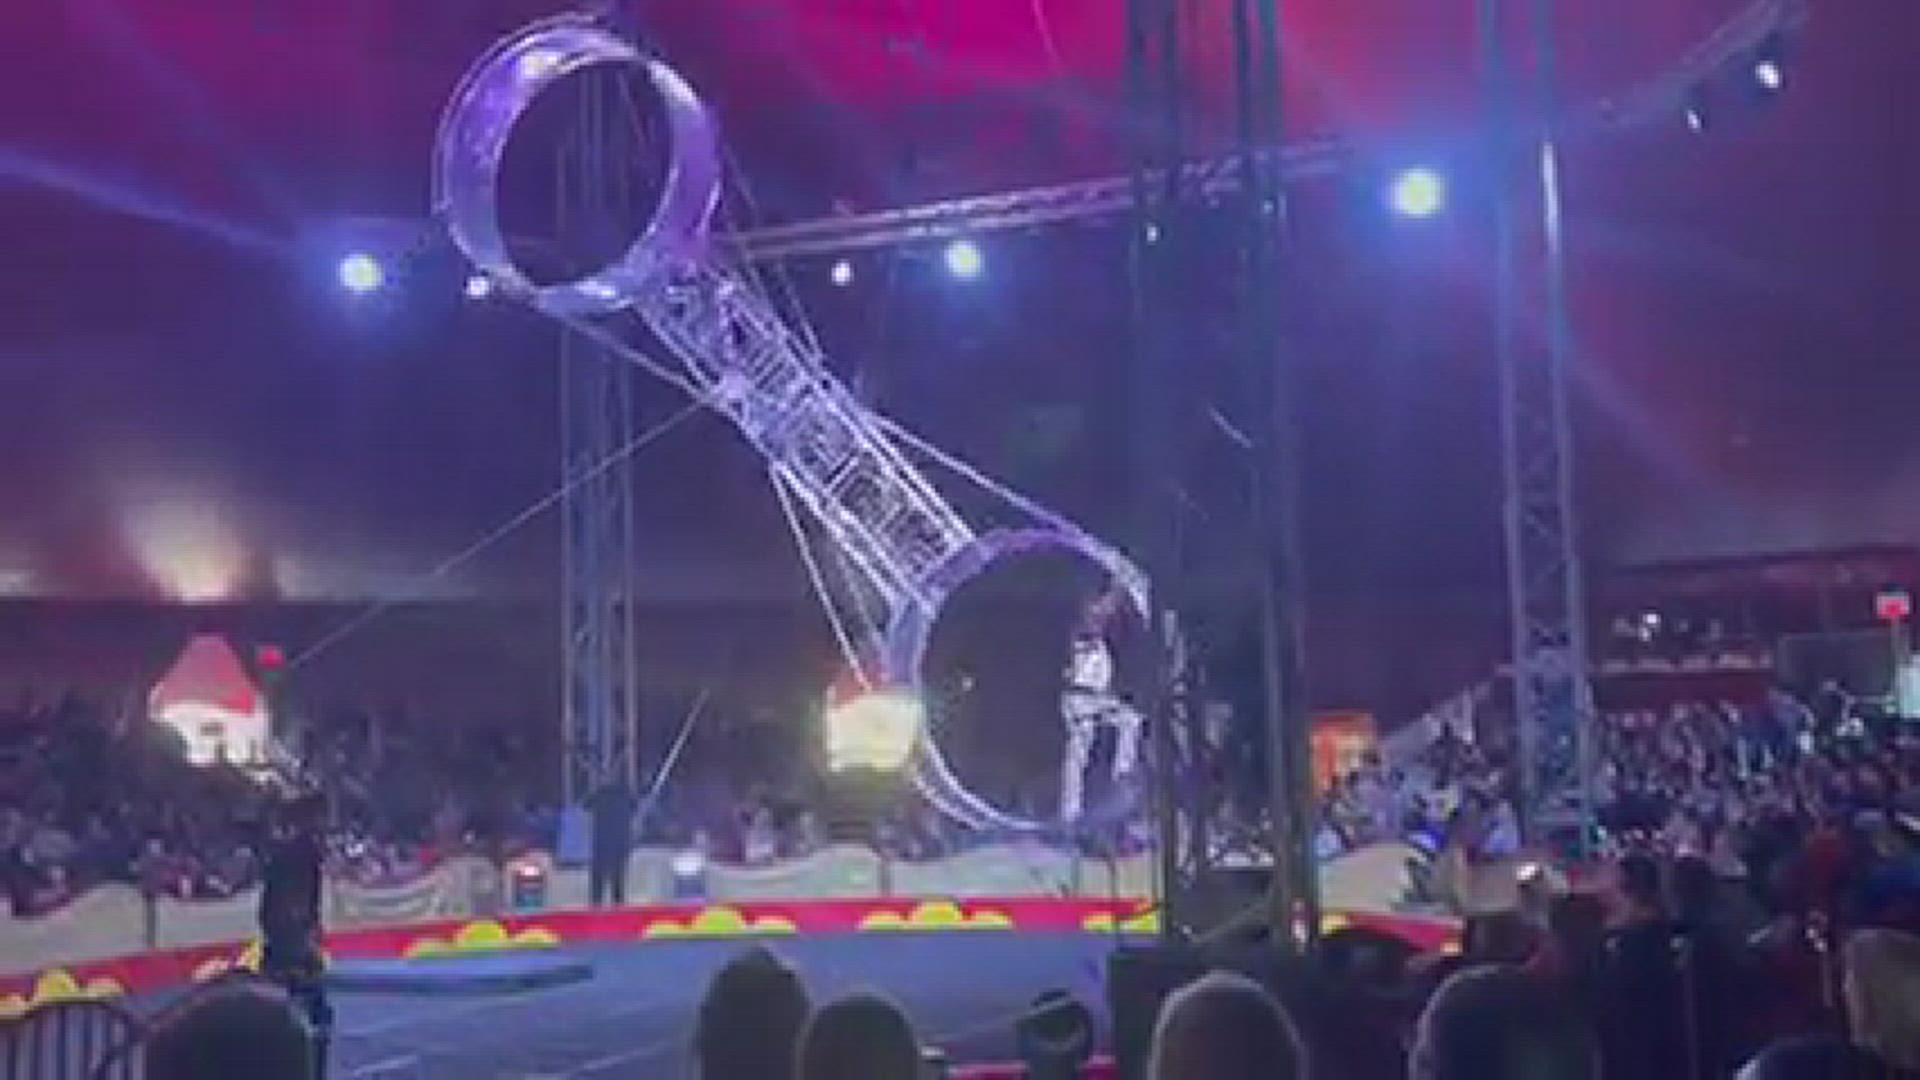 A stunt show came to a shocking halt at the South Carolina State Fair over the weekend. Witnesses said no one appeared to be seriously injured.